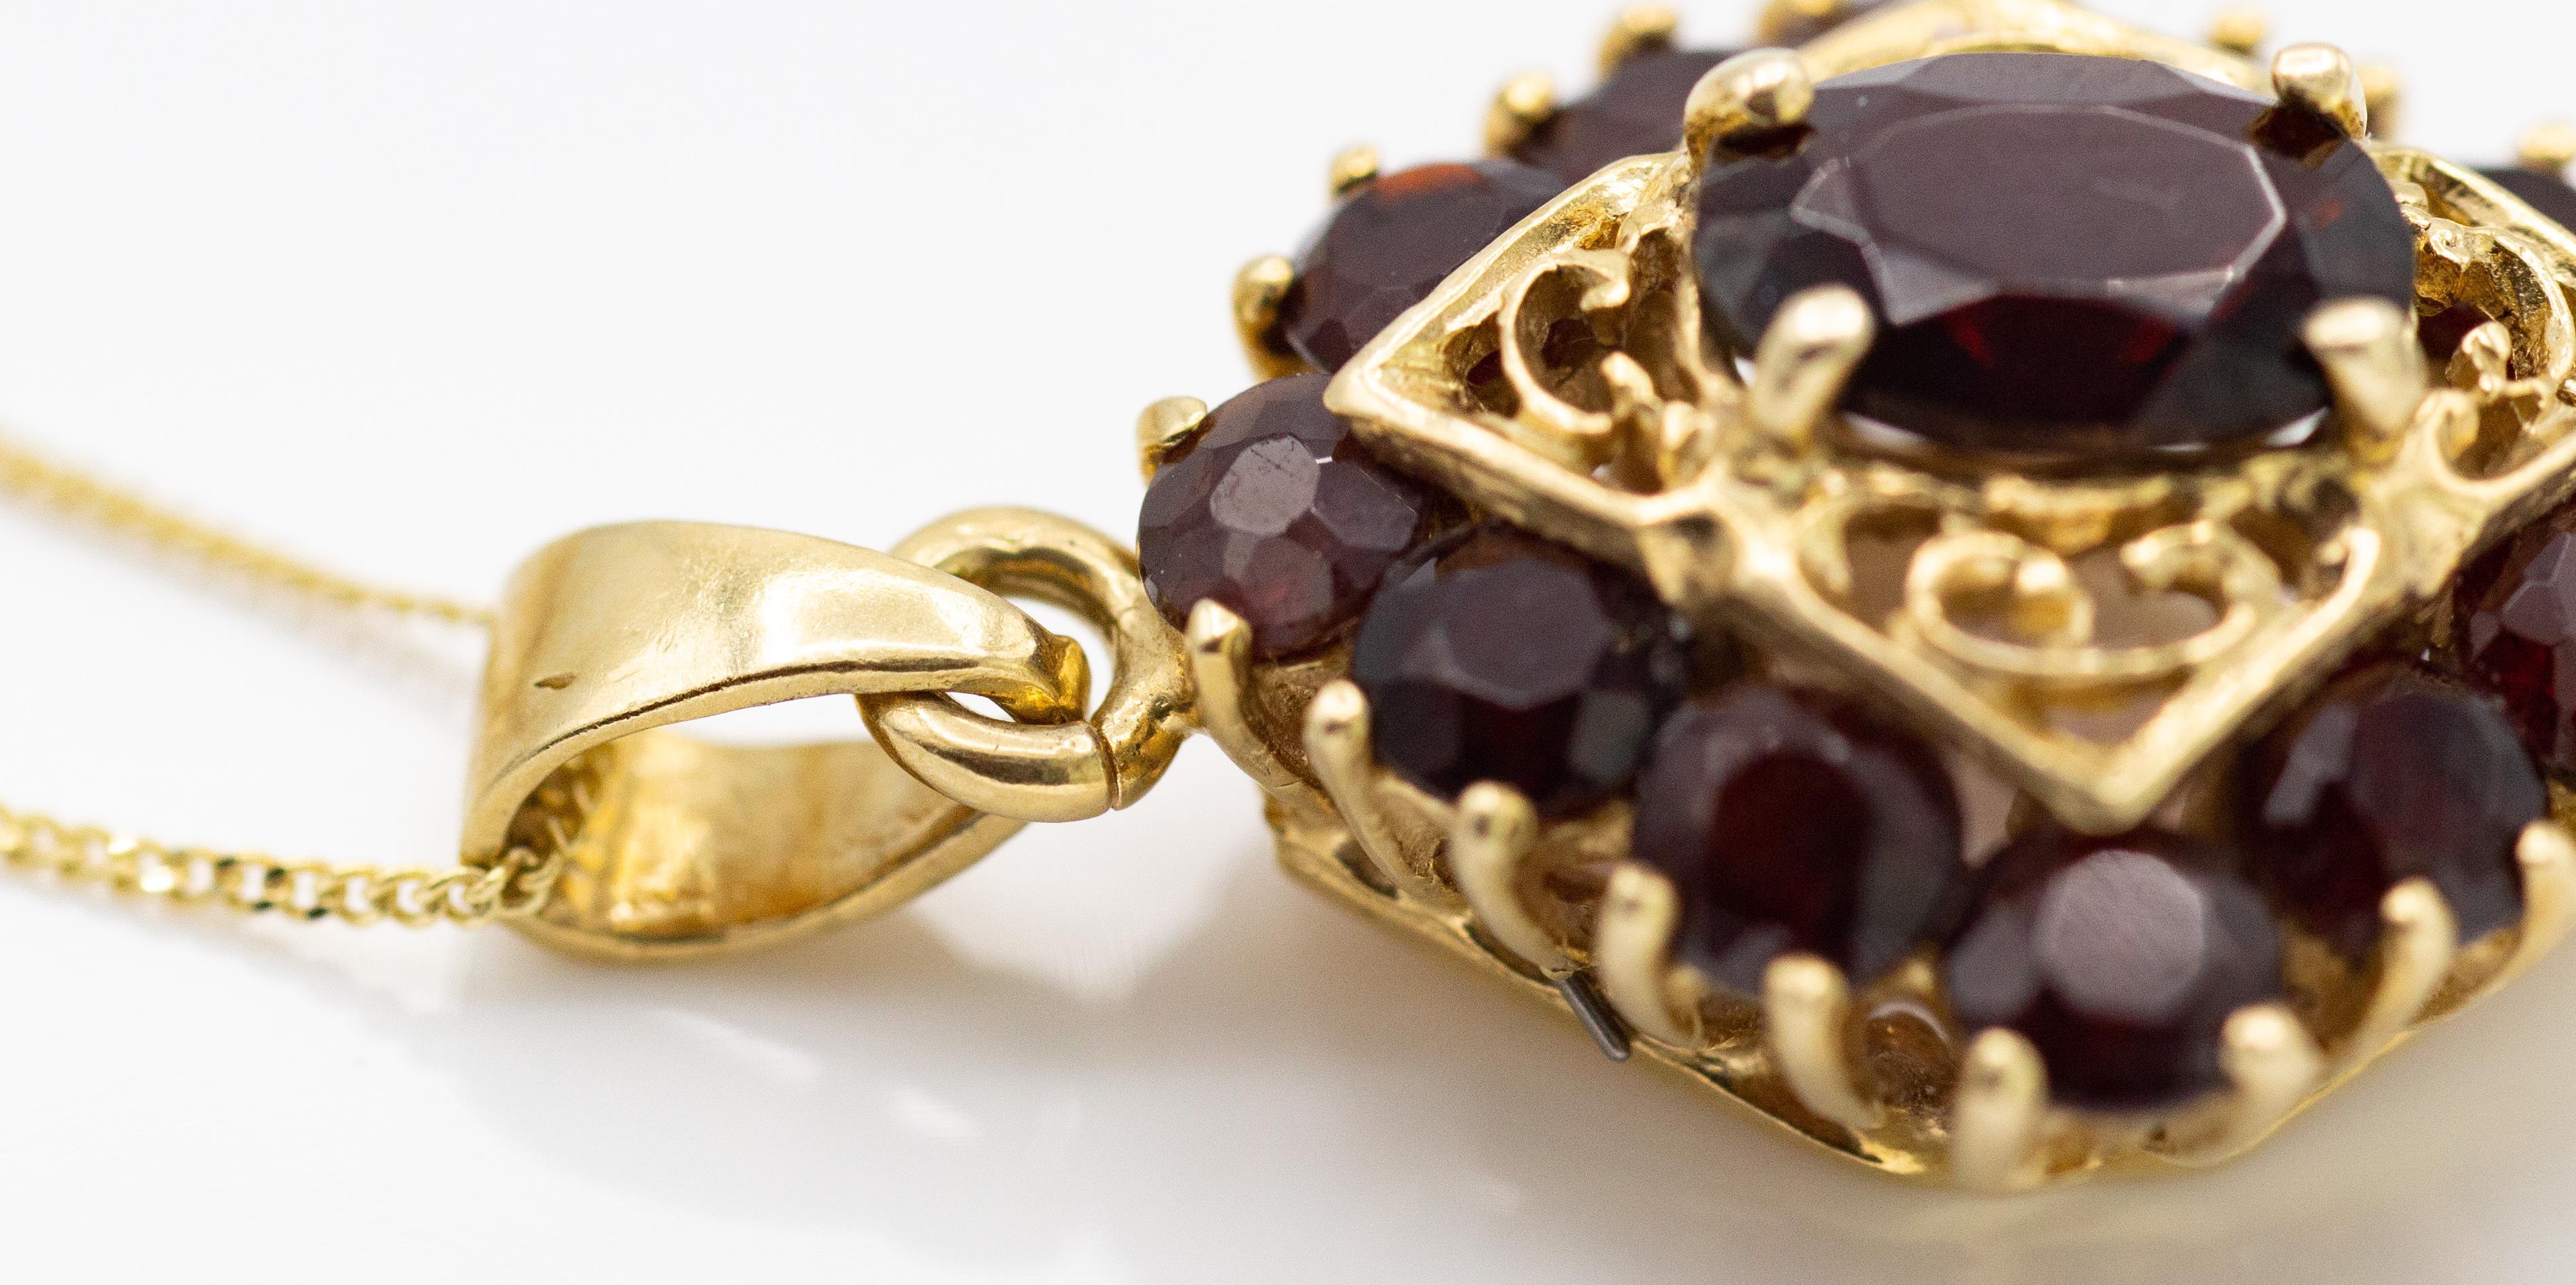 14ct Gold & Garnet Jewellery Suite - Ring - Earrings & Necklace - Image 8 of 9